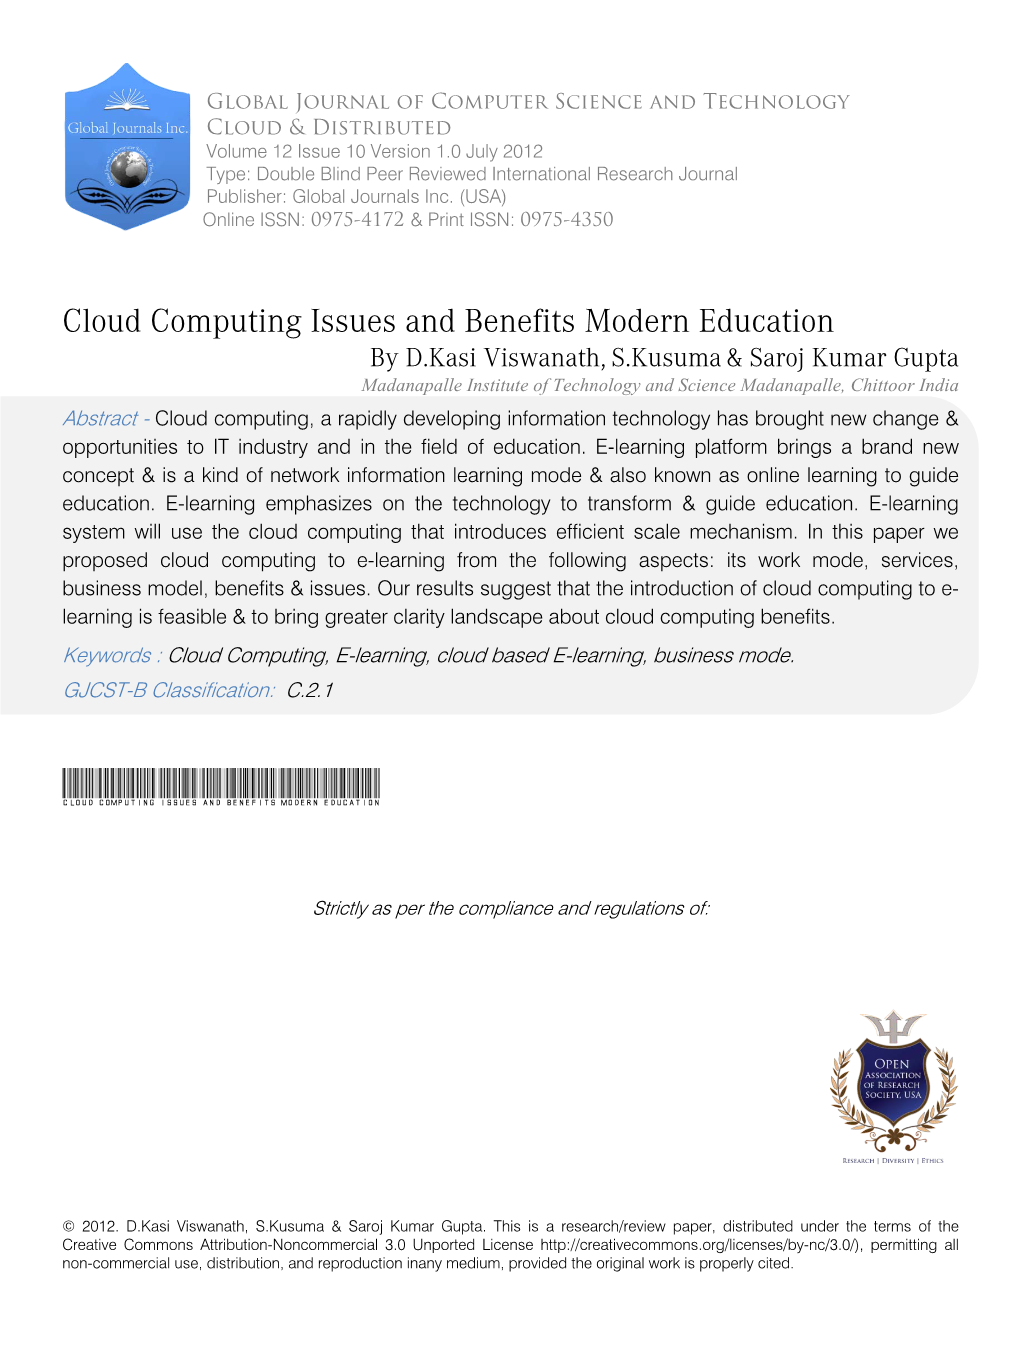 Cloud Computing Issues and Benefits Modern Education